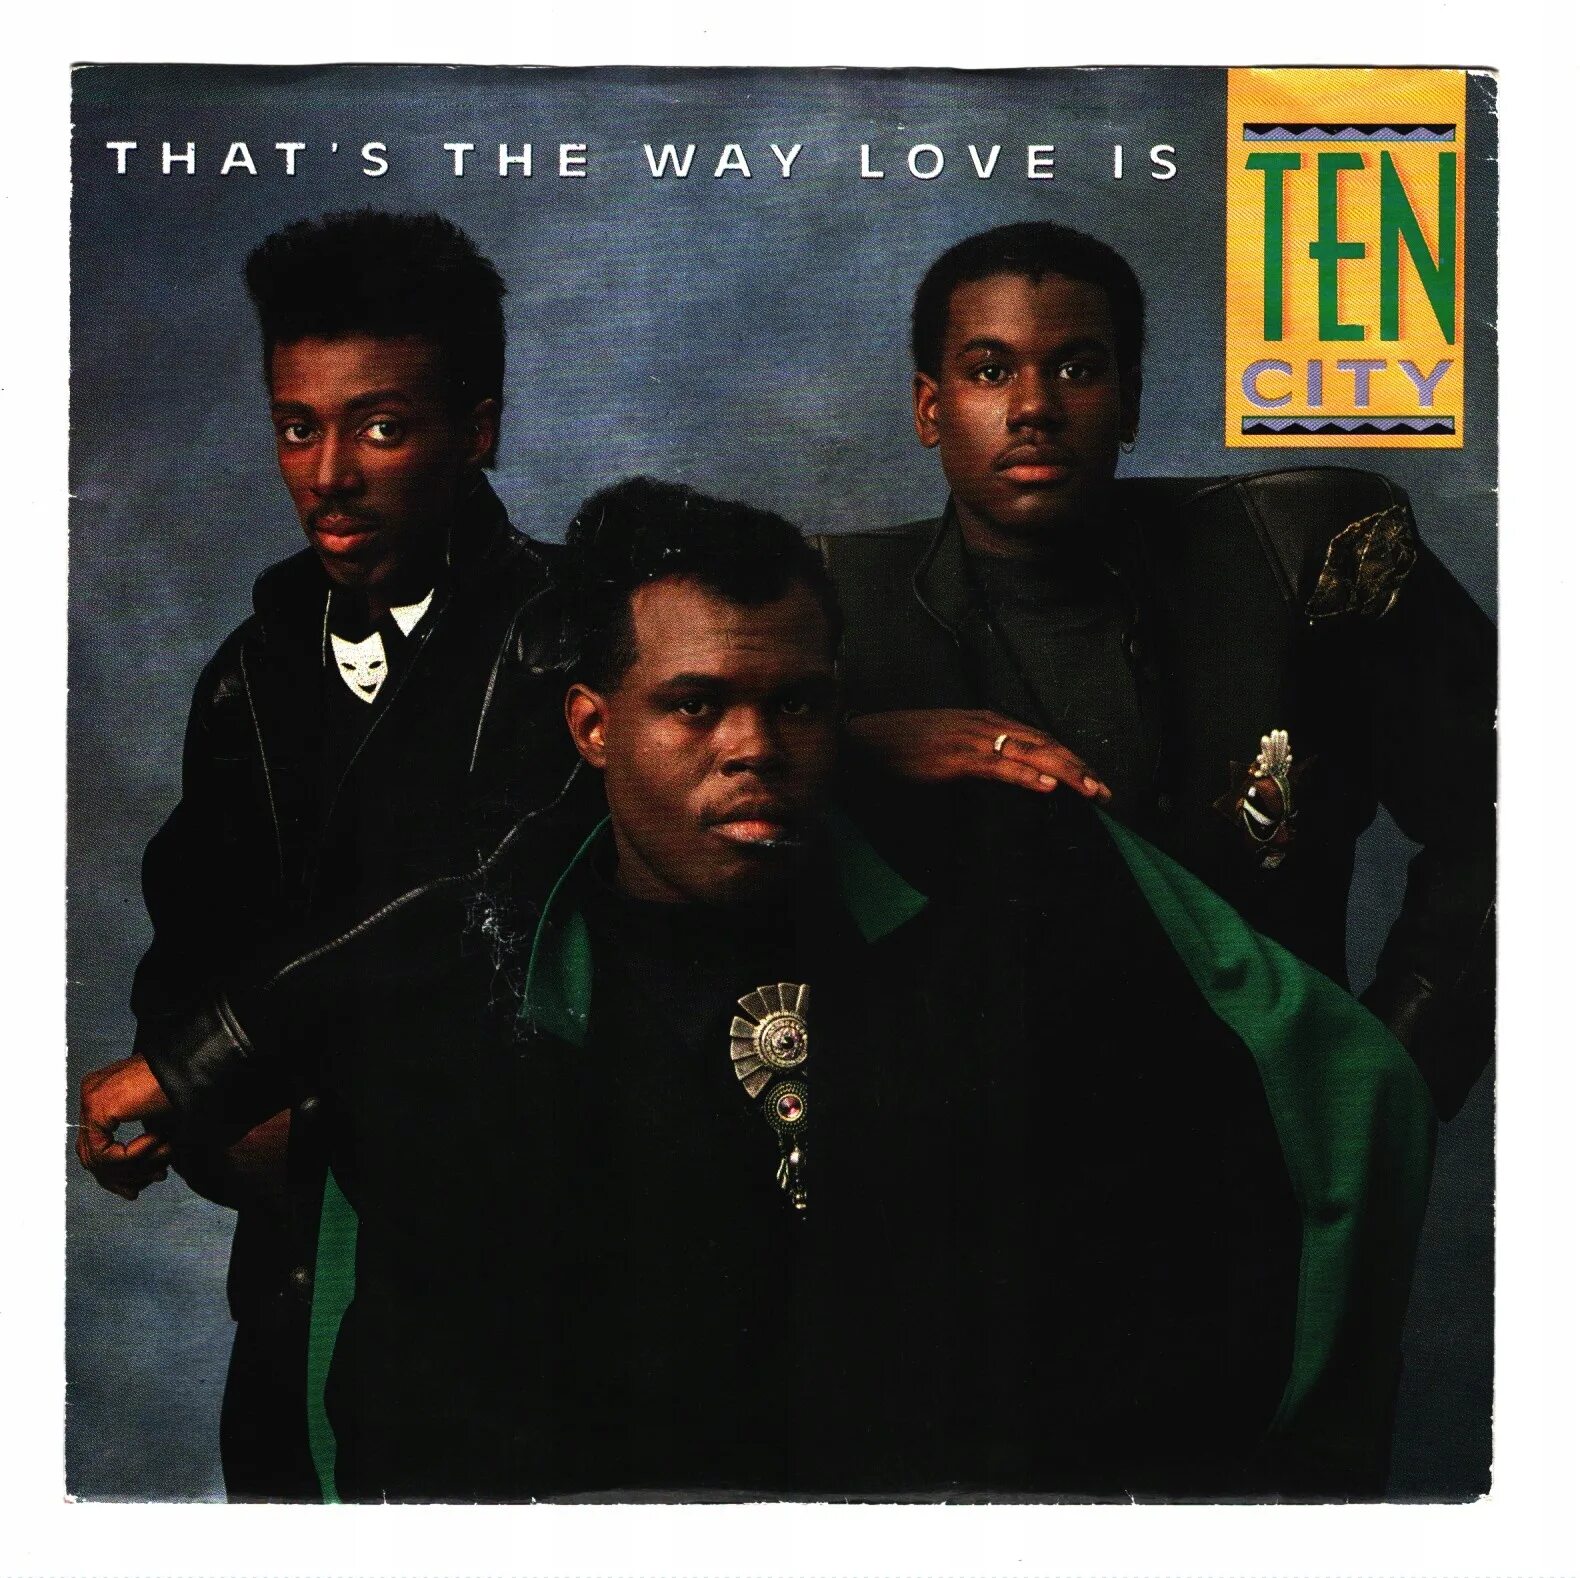 Ten City - that's the way Love is (Tall Paul Remix). Love way. C-ya - Love is the way (Vinyl) (1997). Way s of love